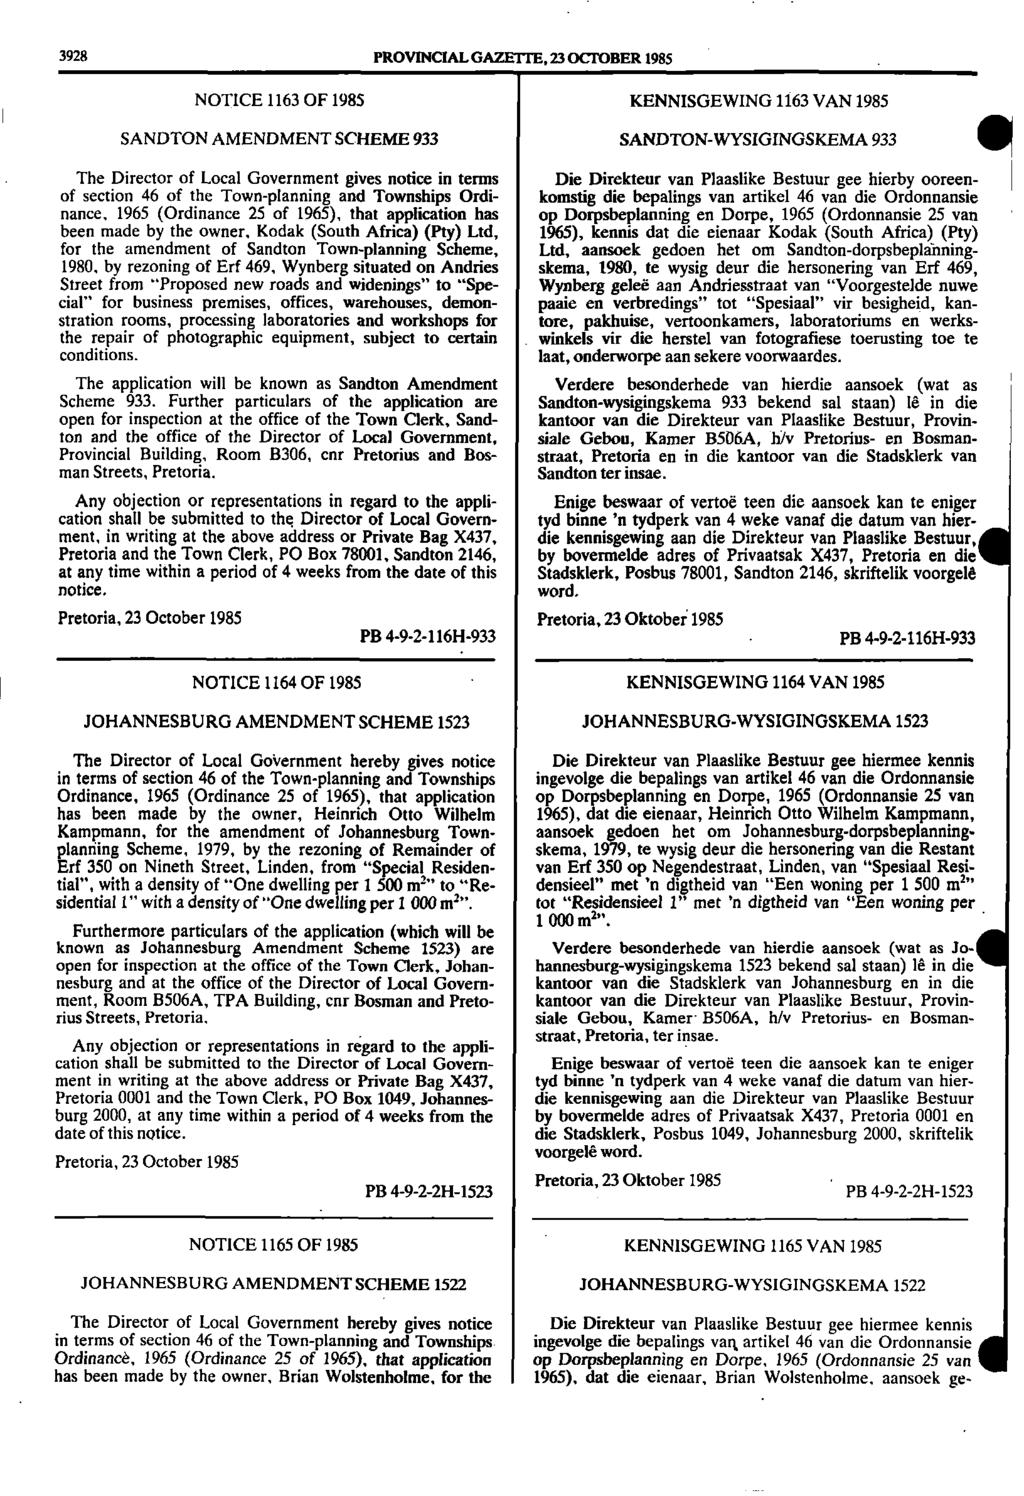 3928 PROVINCIAL GAZETTE, 23 OCTOBER 1985 NOTICE 1163 OF 1985 KENNISGEWING 1163 VAN 1985 SANDTON AMENDMENT SCHEME 933 SANDTONWYSIGINGSKEMA 933 The Director of Local Government gives notice in terms